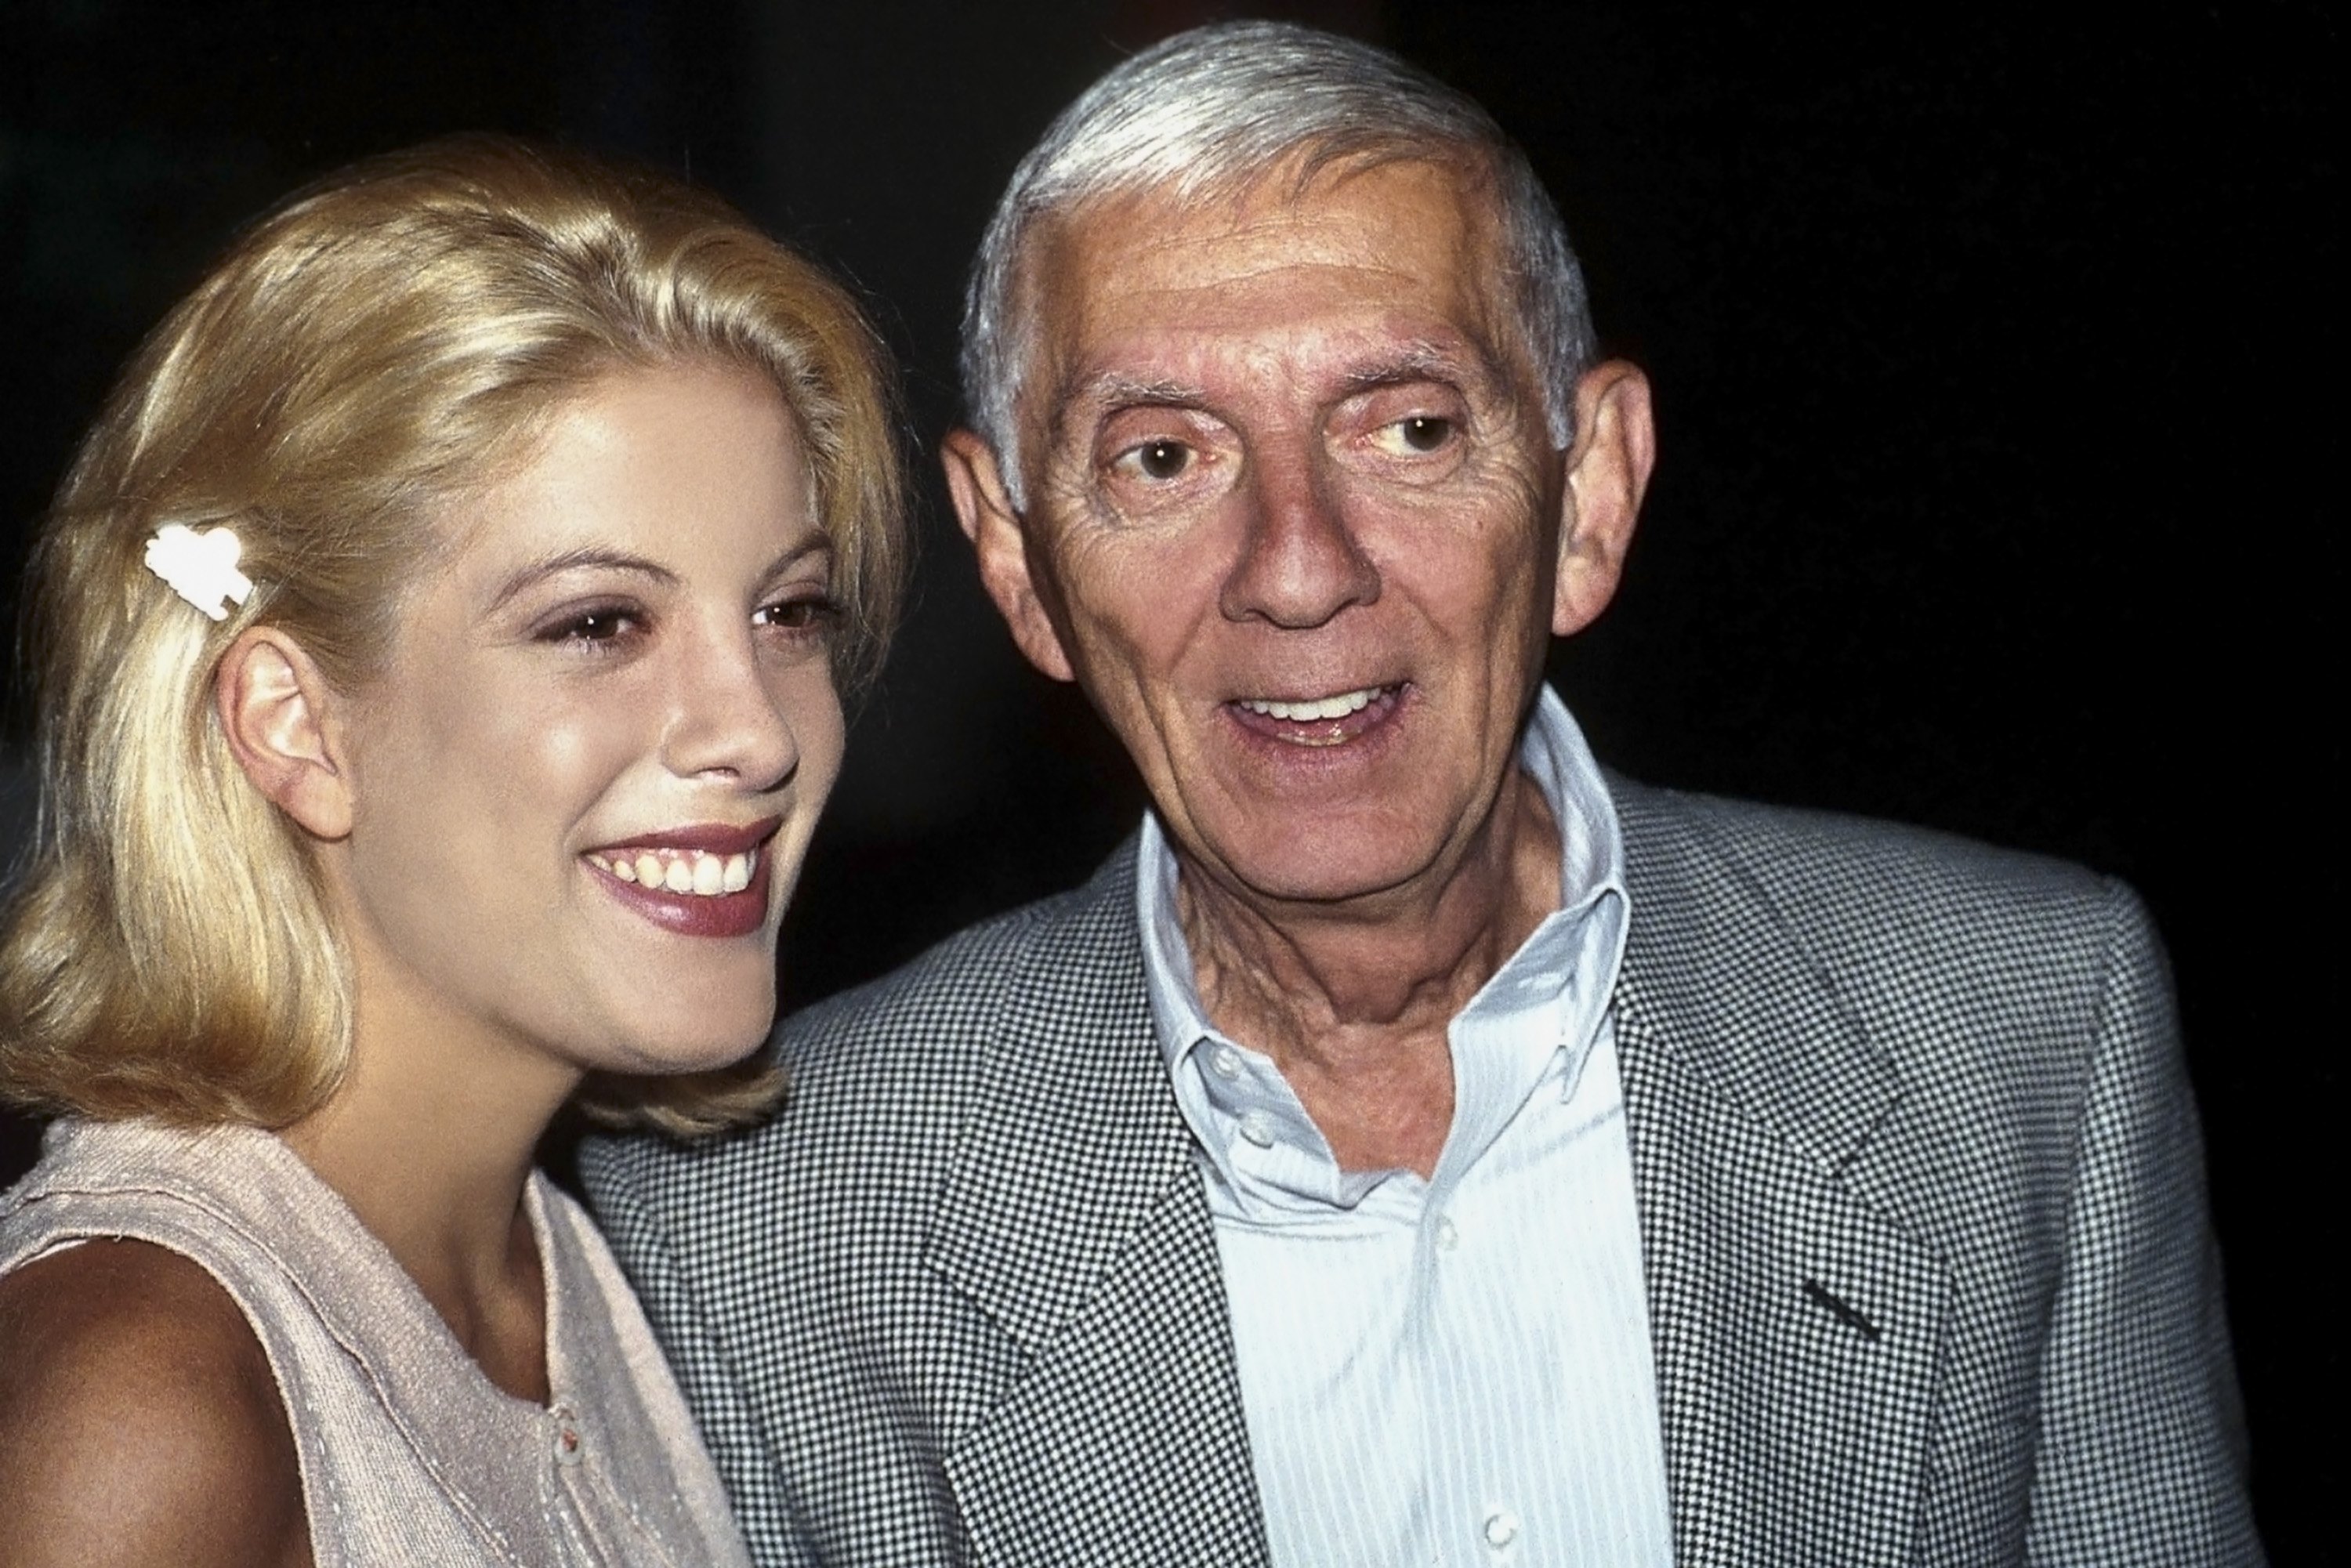 Aaron Spelling and daughter Tori Spelling on July 26, 1994. | Source: Getty Images